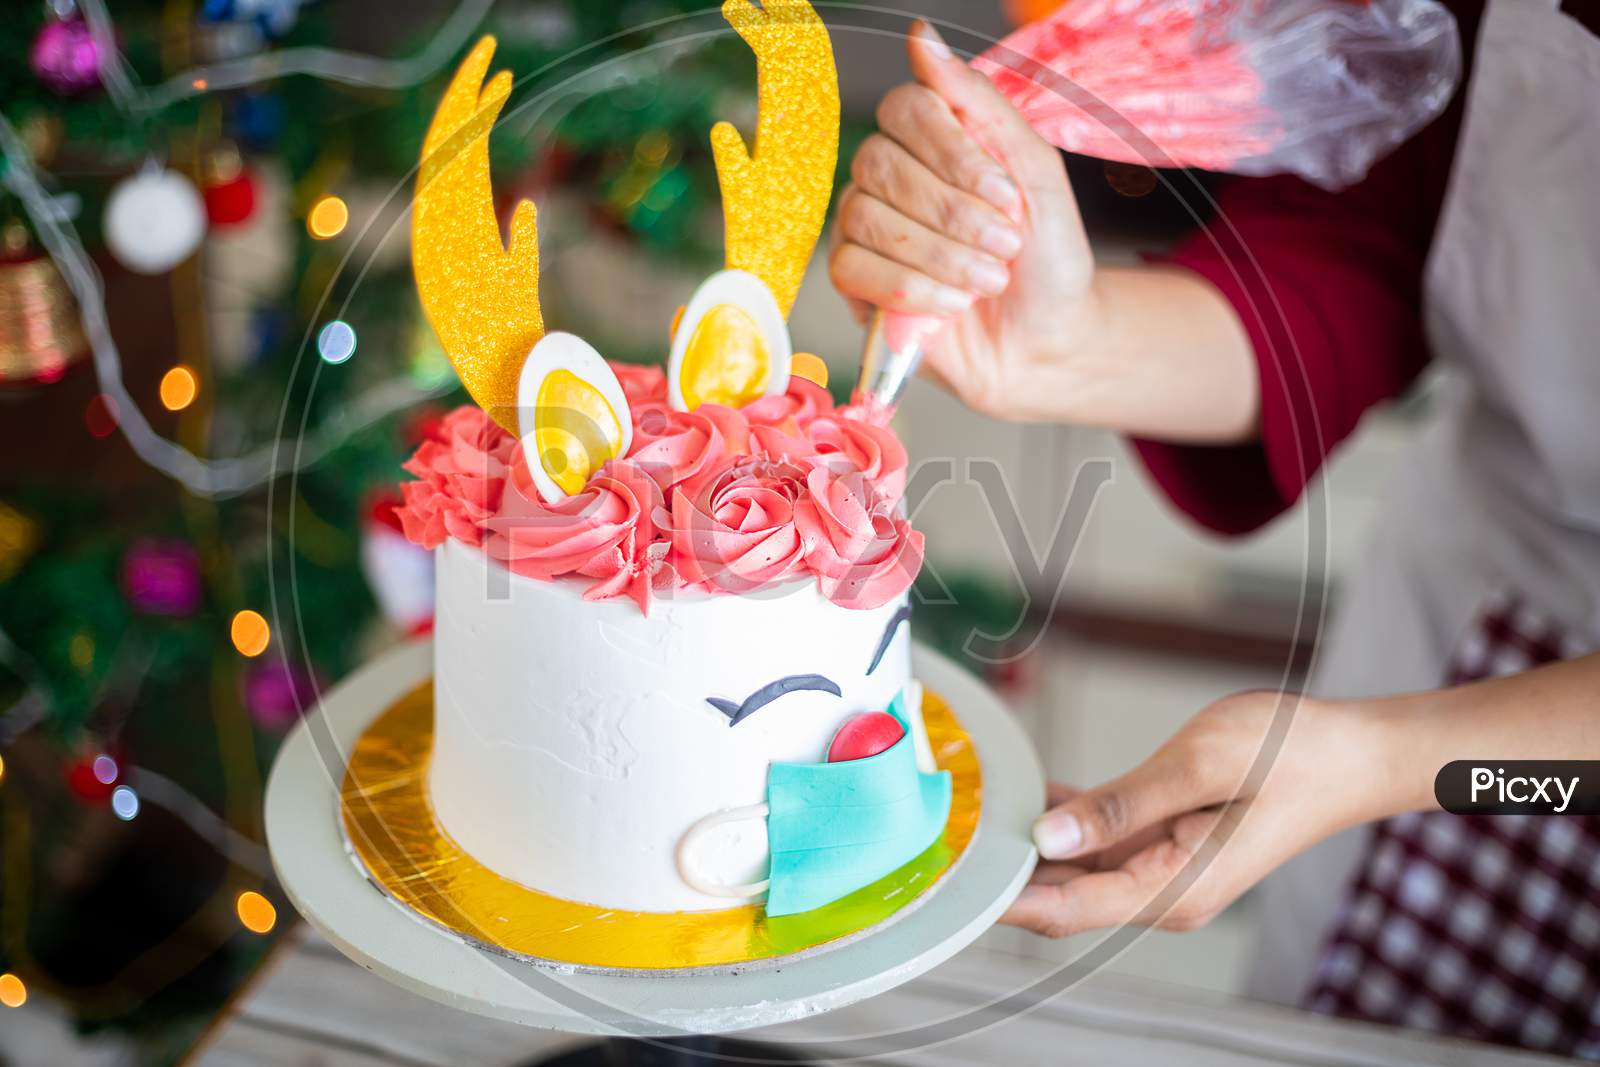 Closeup of hand preparing christmas deer design cake at home, icing butter cream.with piping bag, celebration during covid pandemic, festive holiday season